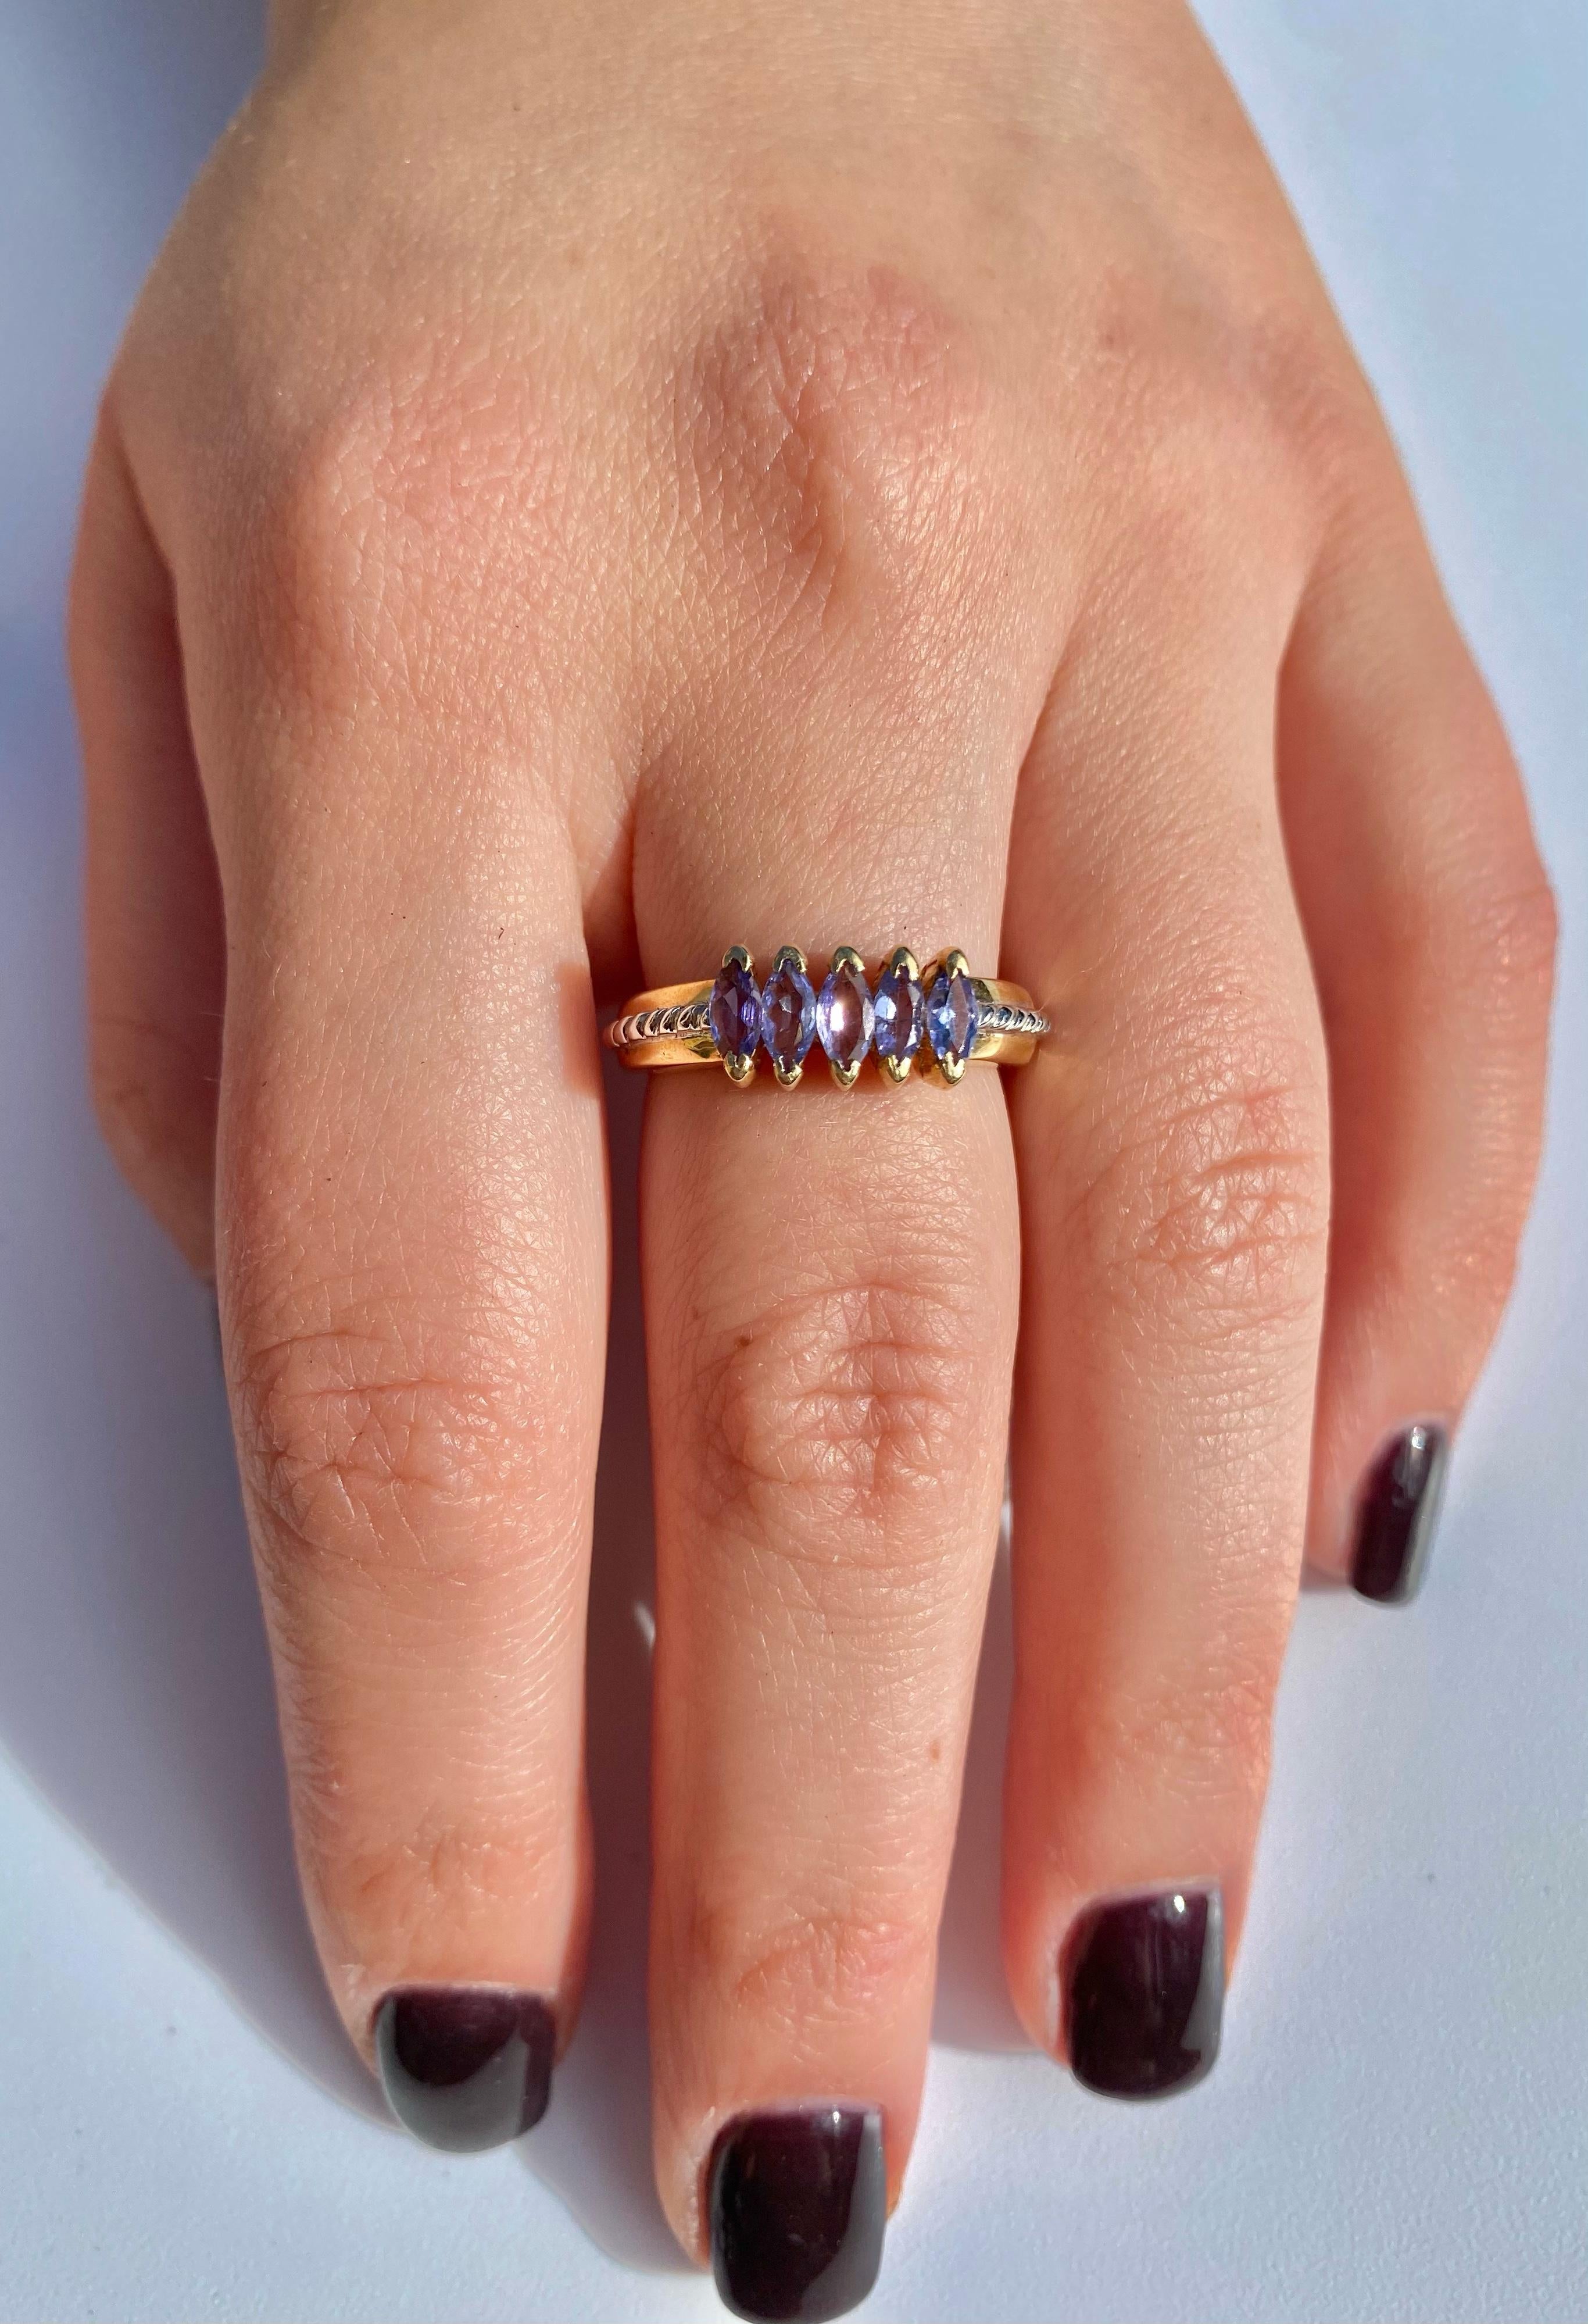 Centering Five Marquis-Cut Tanzanites totaling 0.75 Carats and set in 14K Yellow Gold, this multi-colored ring is ideal for stacking with other gemstones, such as White Diamonds or Emeralds. 

Details:
✔ Stone: Tanzanite
✔ Center-Stone Weight: 0.75